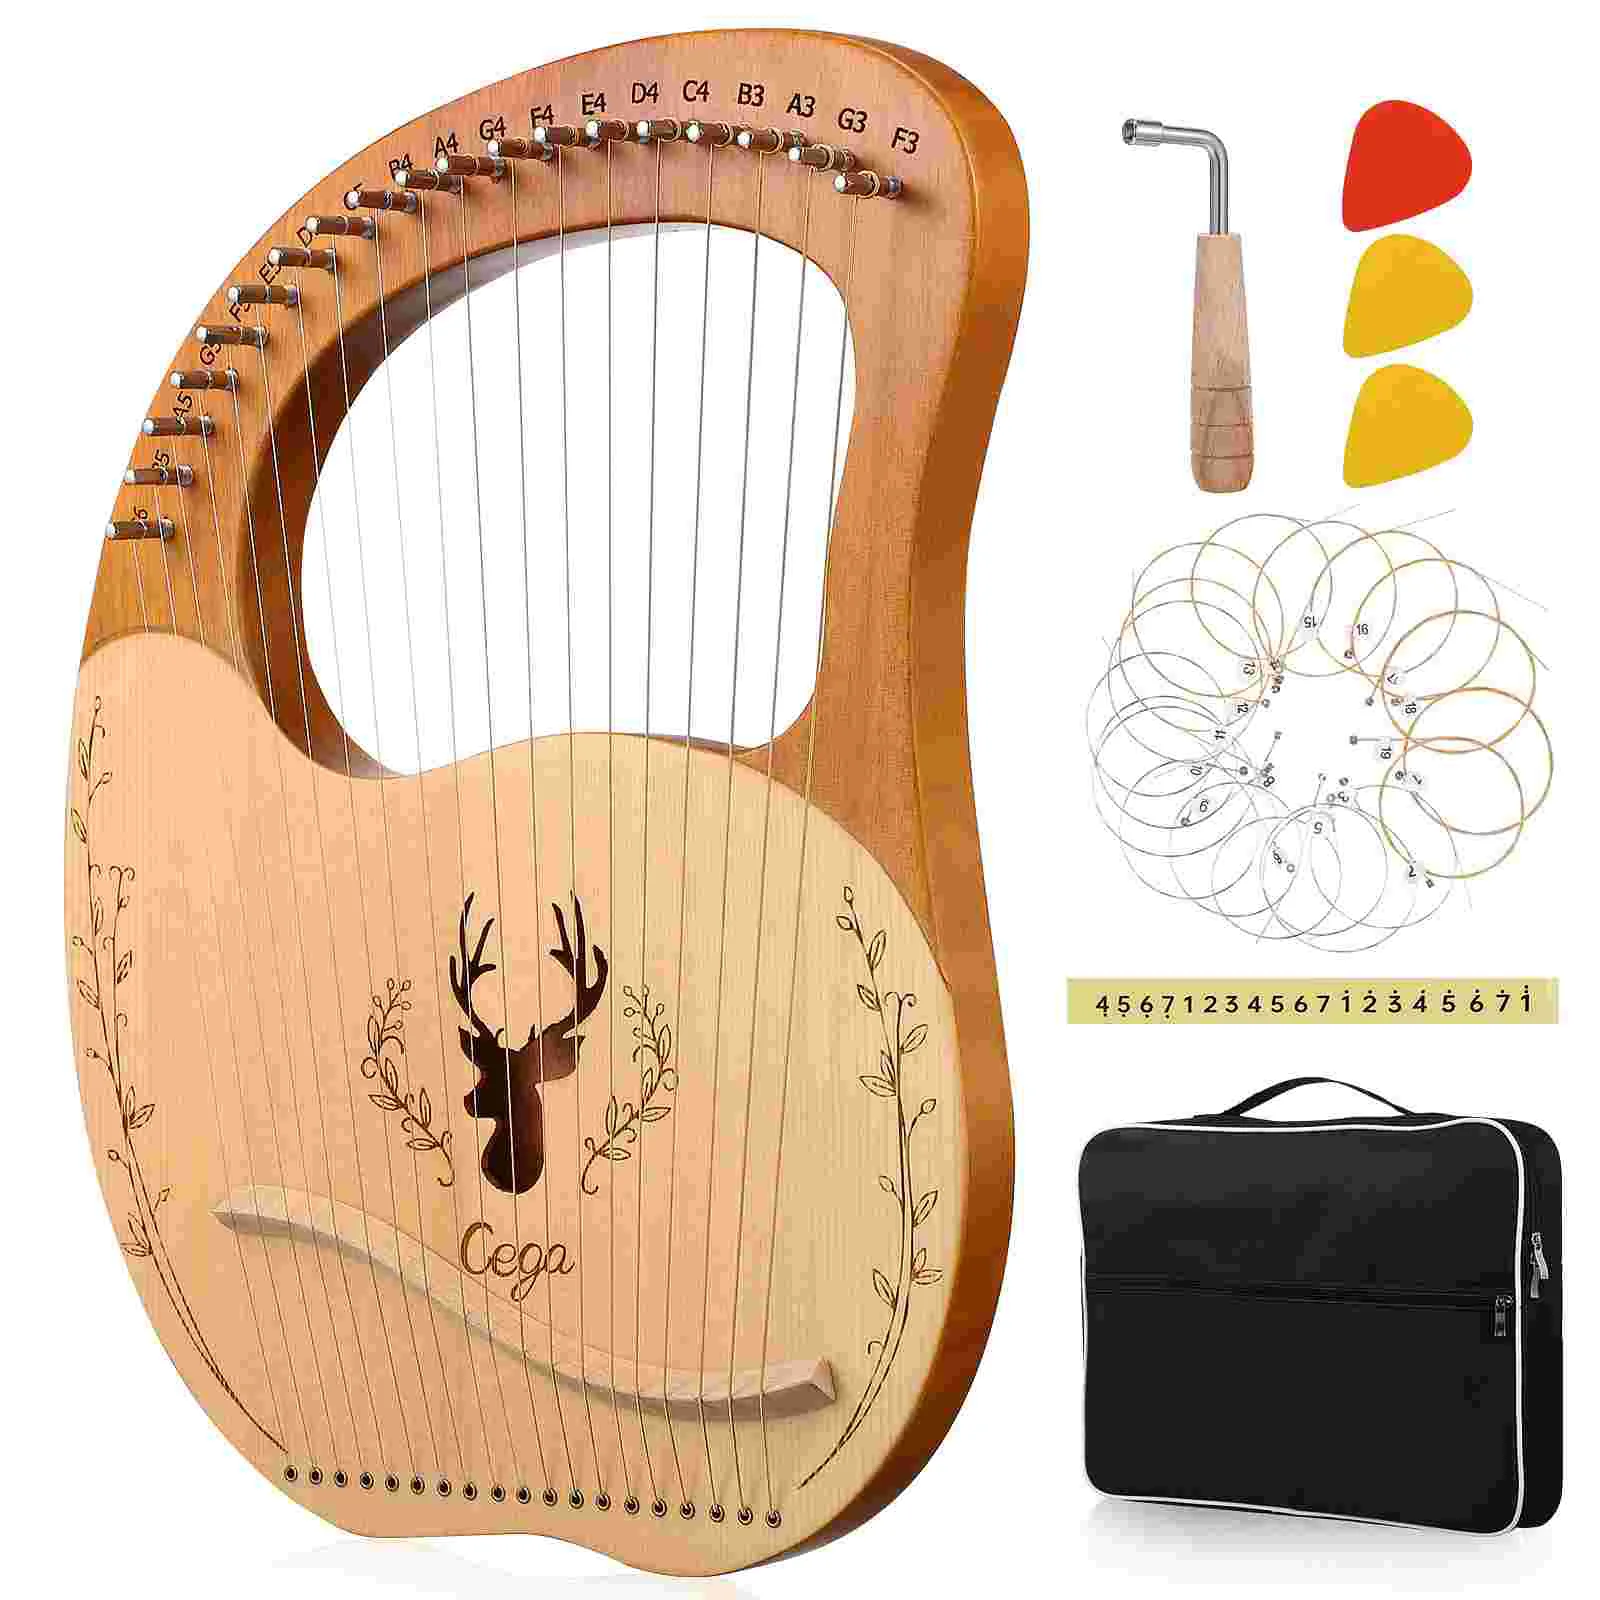 

Portable Lyre Harp Set 19 Metal Strings Lyre Harp with Tuning Key Strings and Storage Bag for Begginers